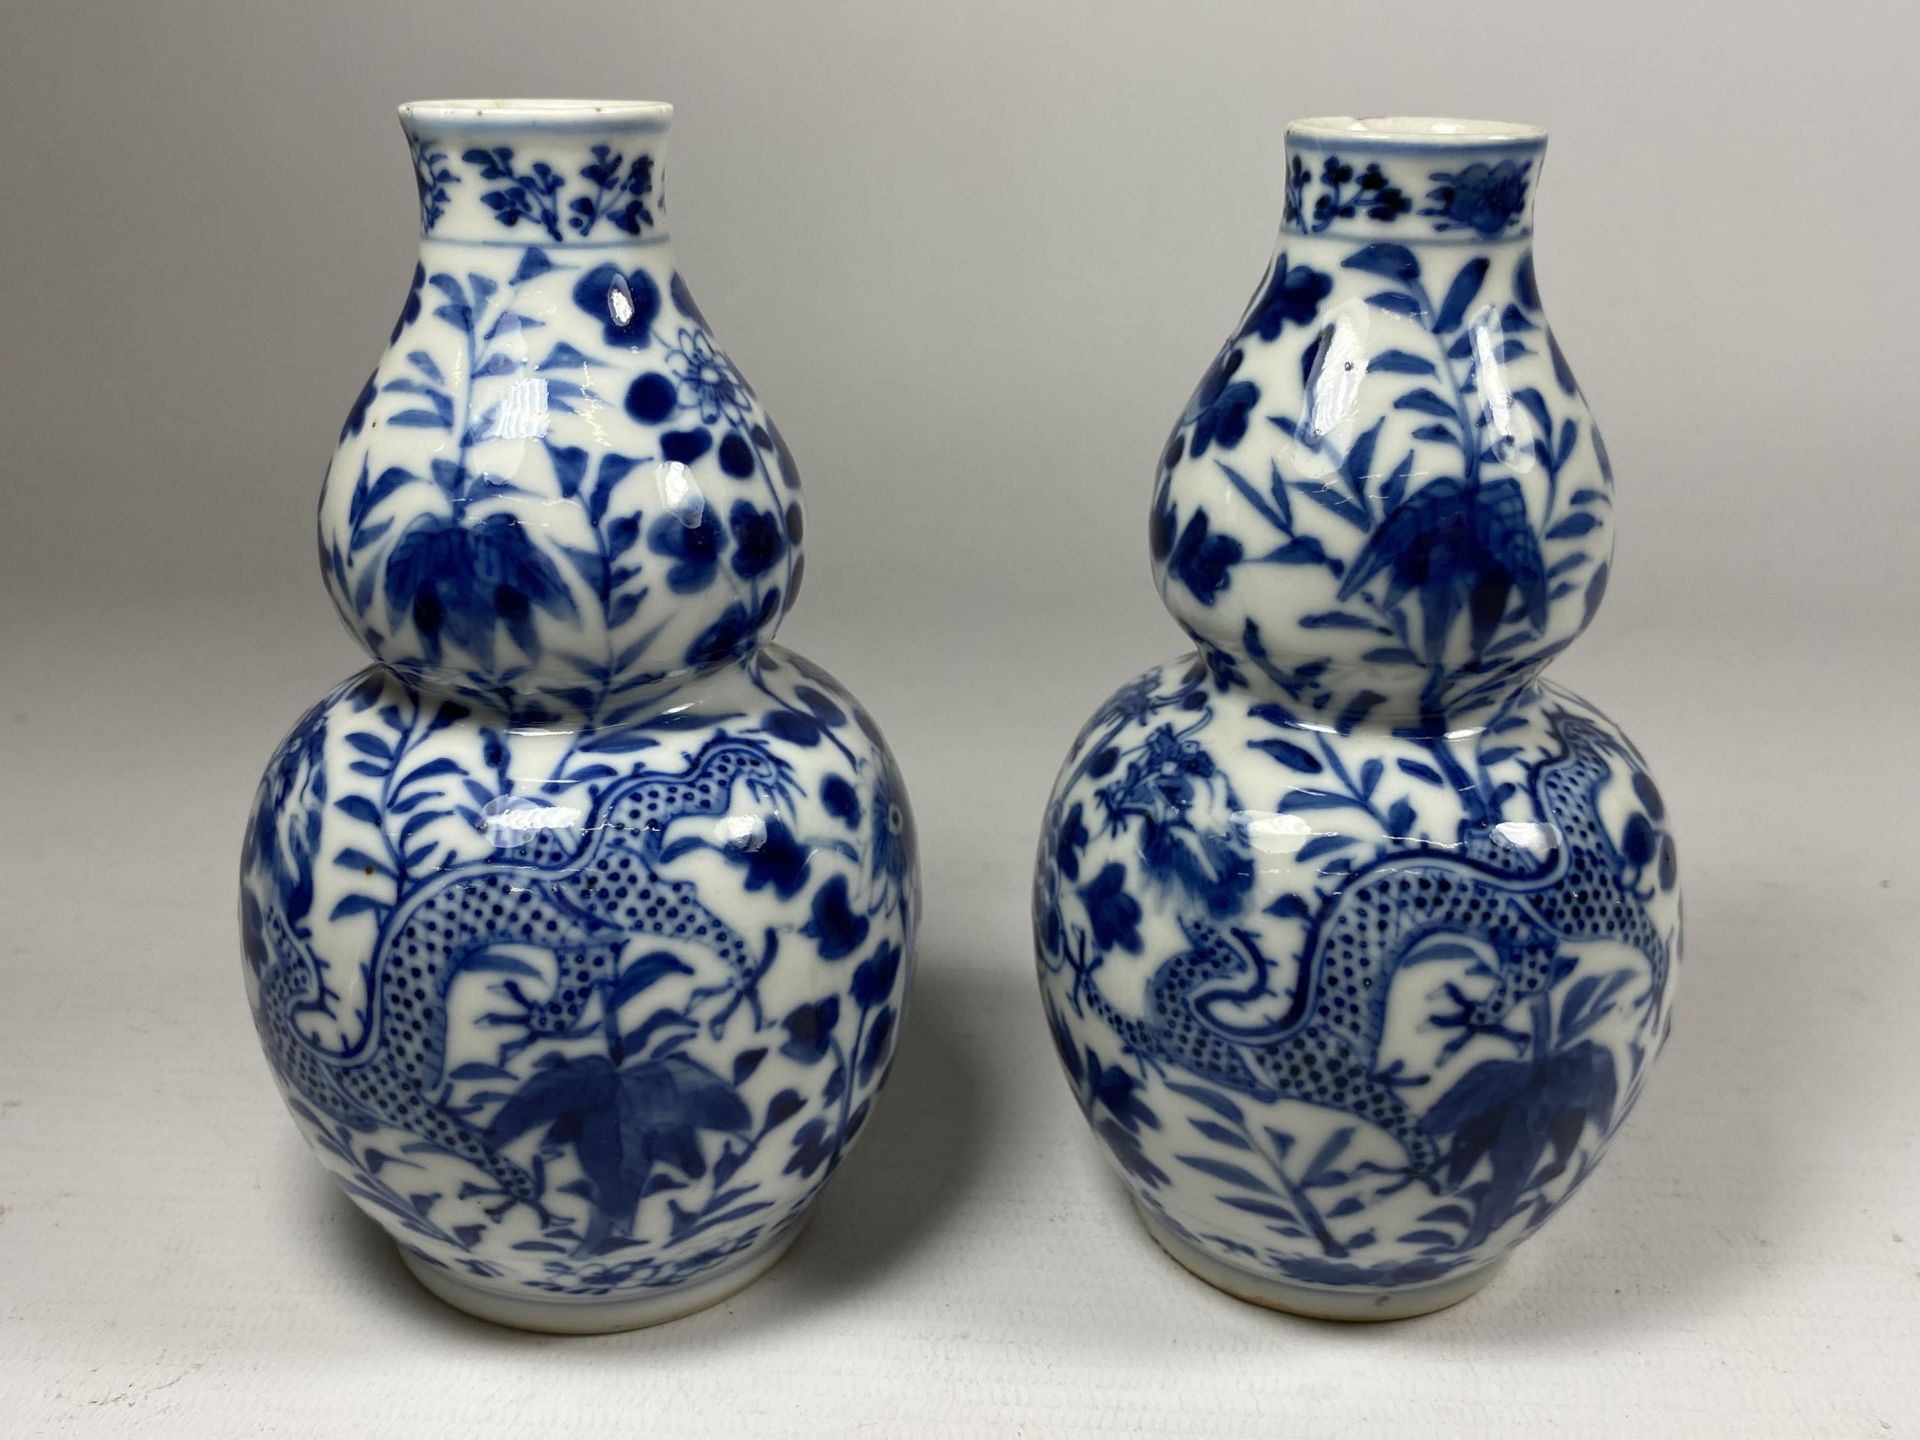 A PAIR OF QING 19TH CENTURY CHINESE BLUE AND WHITE KANGXI STYLE DOUBLE GOURD VASES, FOUR CHARACTER - Image 4 of 9